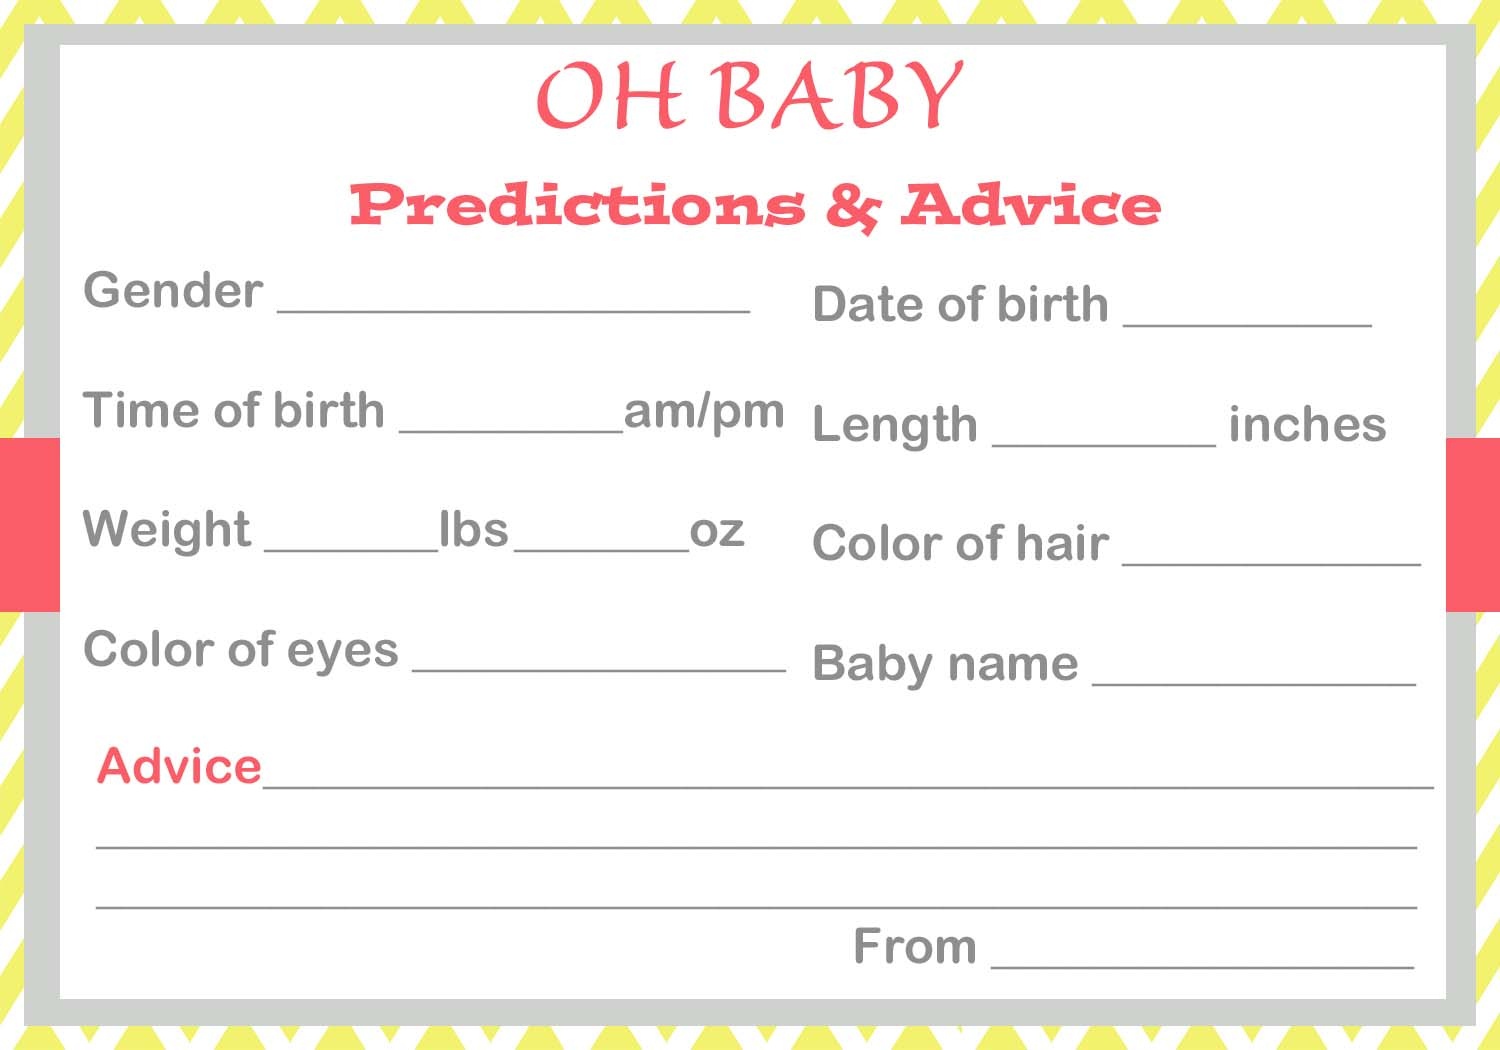 Baby Shower Ice Breaker Games - Free Printable Baby Shower Games For Large Groups